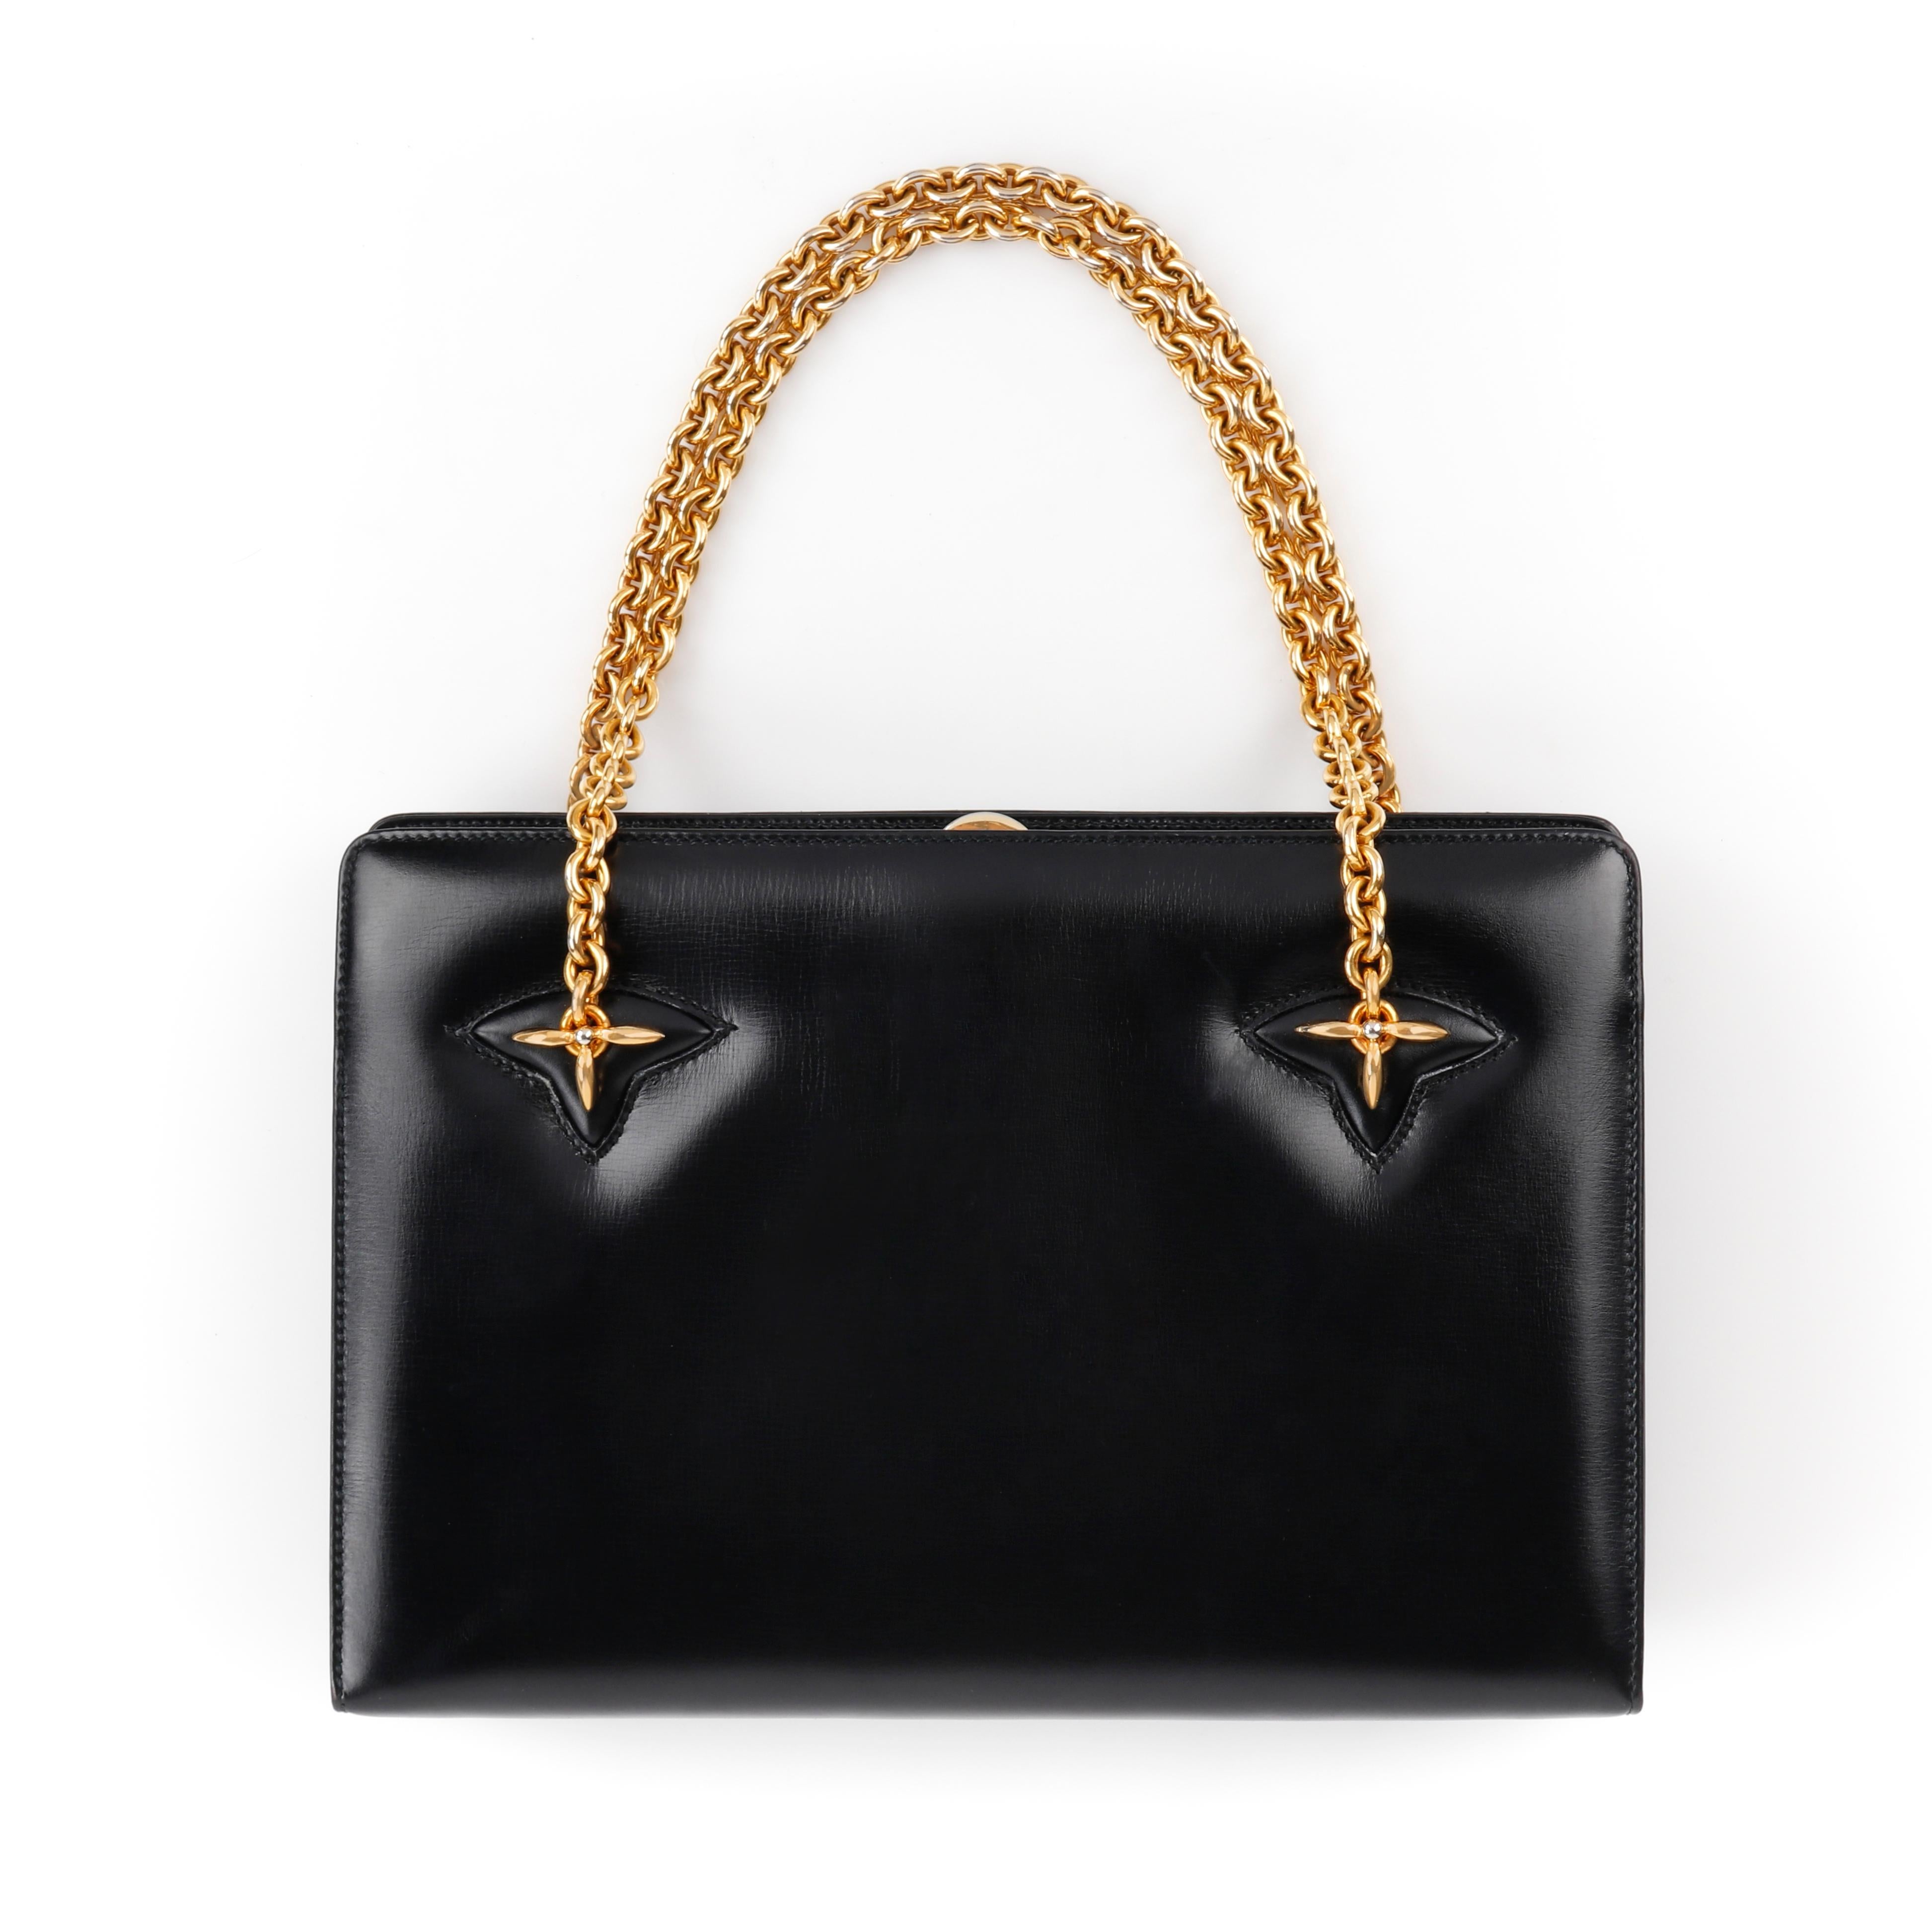 GUCCI c.1960’s Black Leather Gold Chain Link Push Lock Handbag RARE
 
Circa: 1960’s 
Label(s): Gucci 
Style: Handbag
Color(s): Black
Lined: Yes
Unmarked Fabric Content: Leather 
Additional Details / Inclusions: Black structured handbag; attached